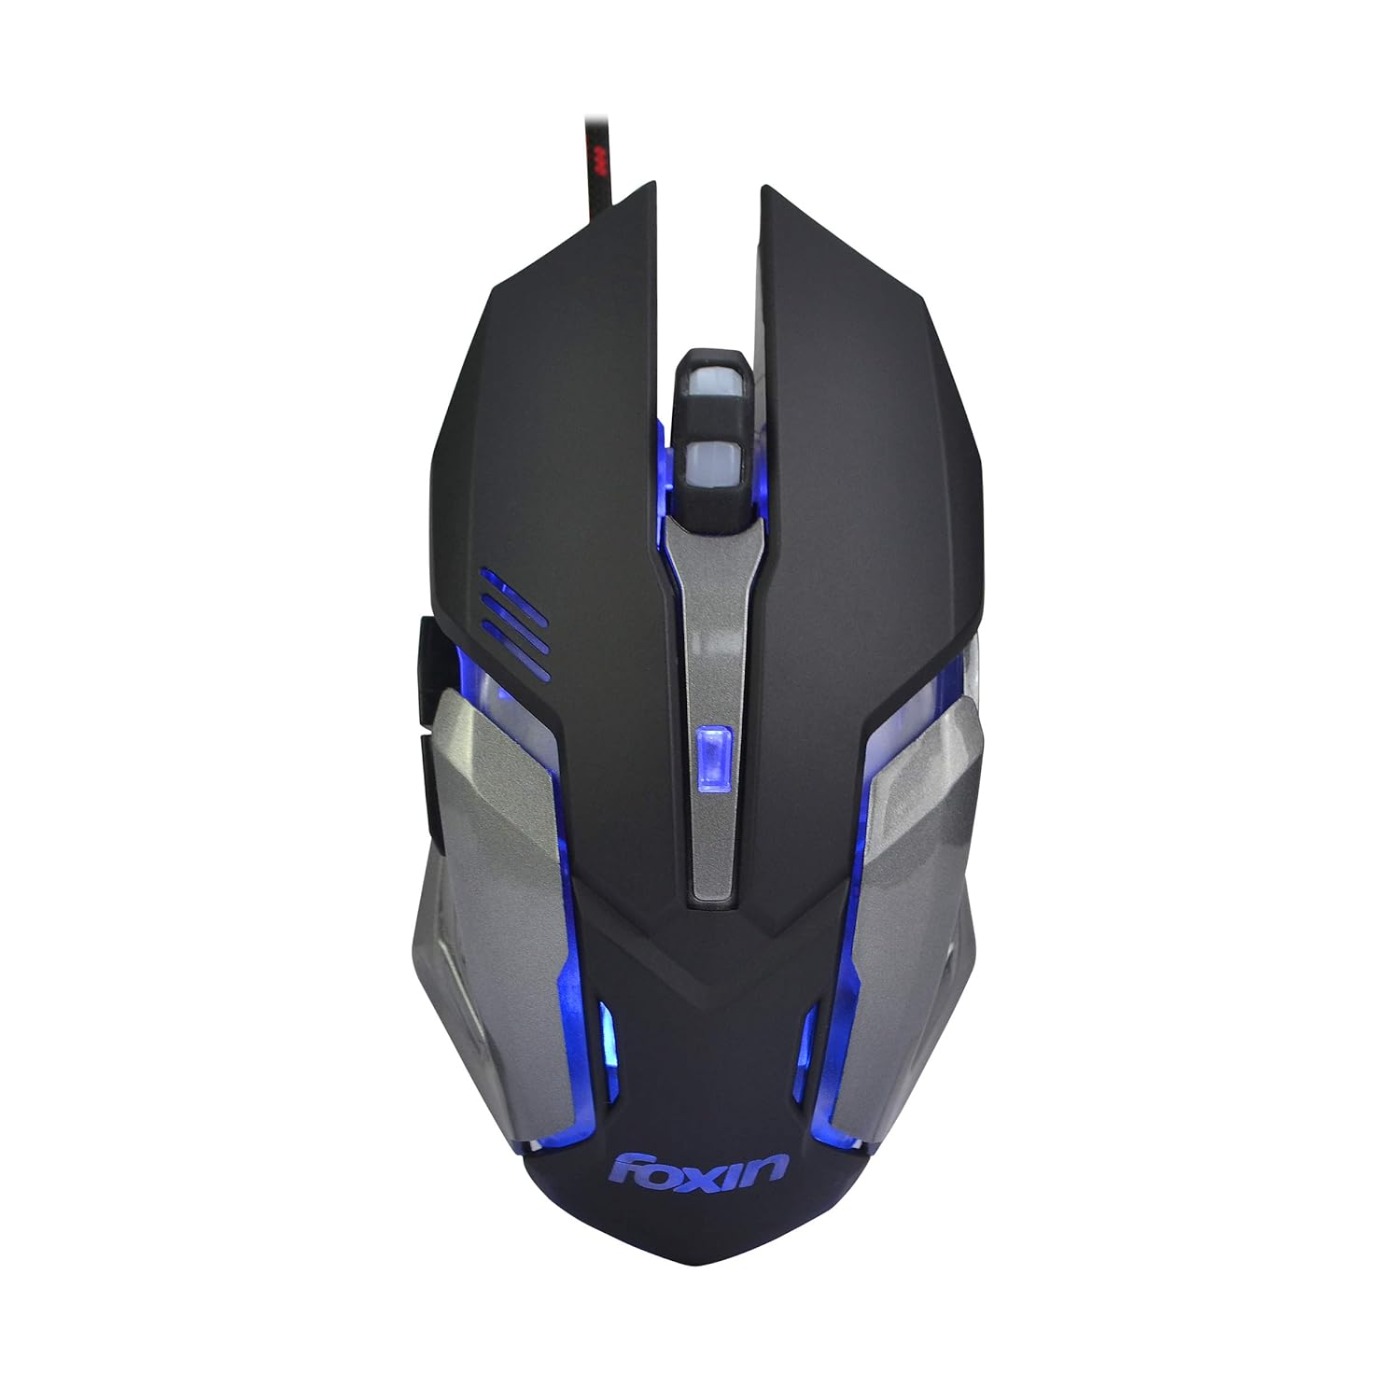 Foxin  Foxin FGM-601 Optical Gaming Mouse (Black)